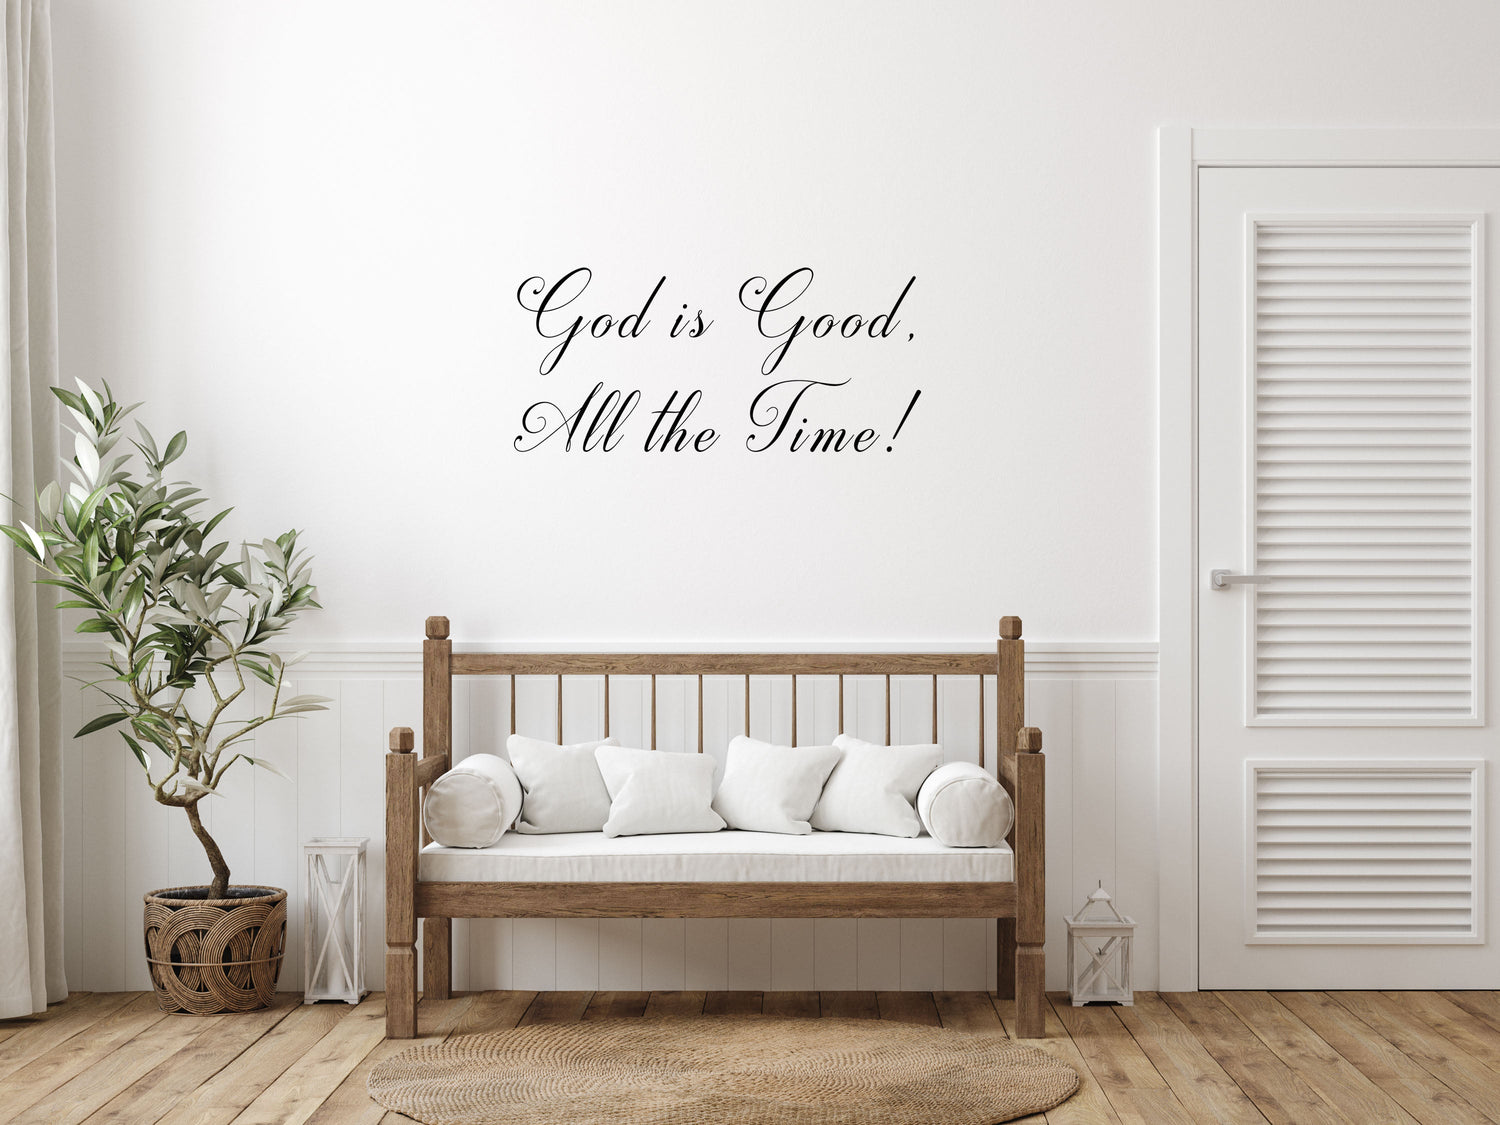 God Is Good All The Time - Handmade Wall Art Vinyl Wall Decal Inspirational Wall Signs 